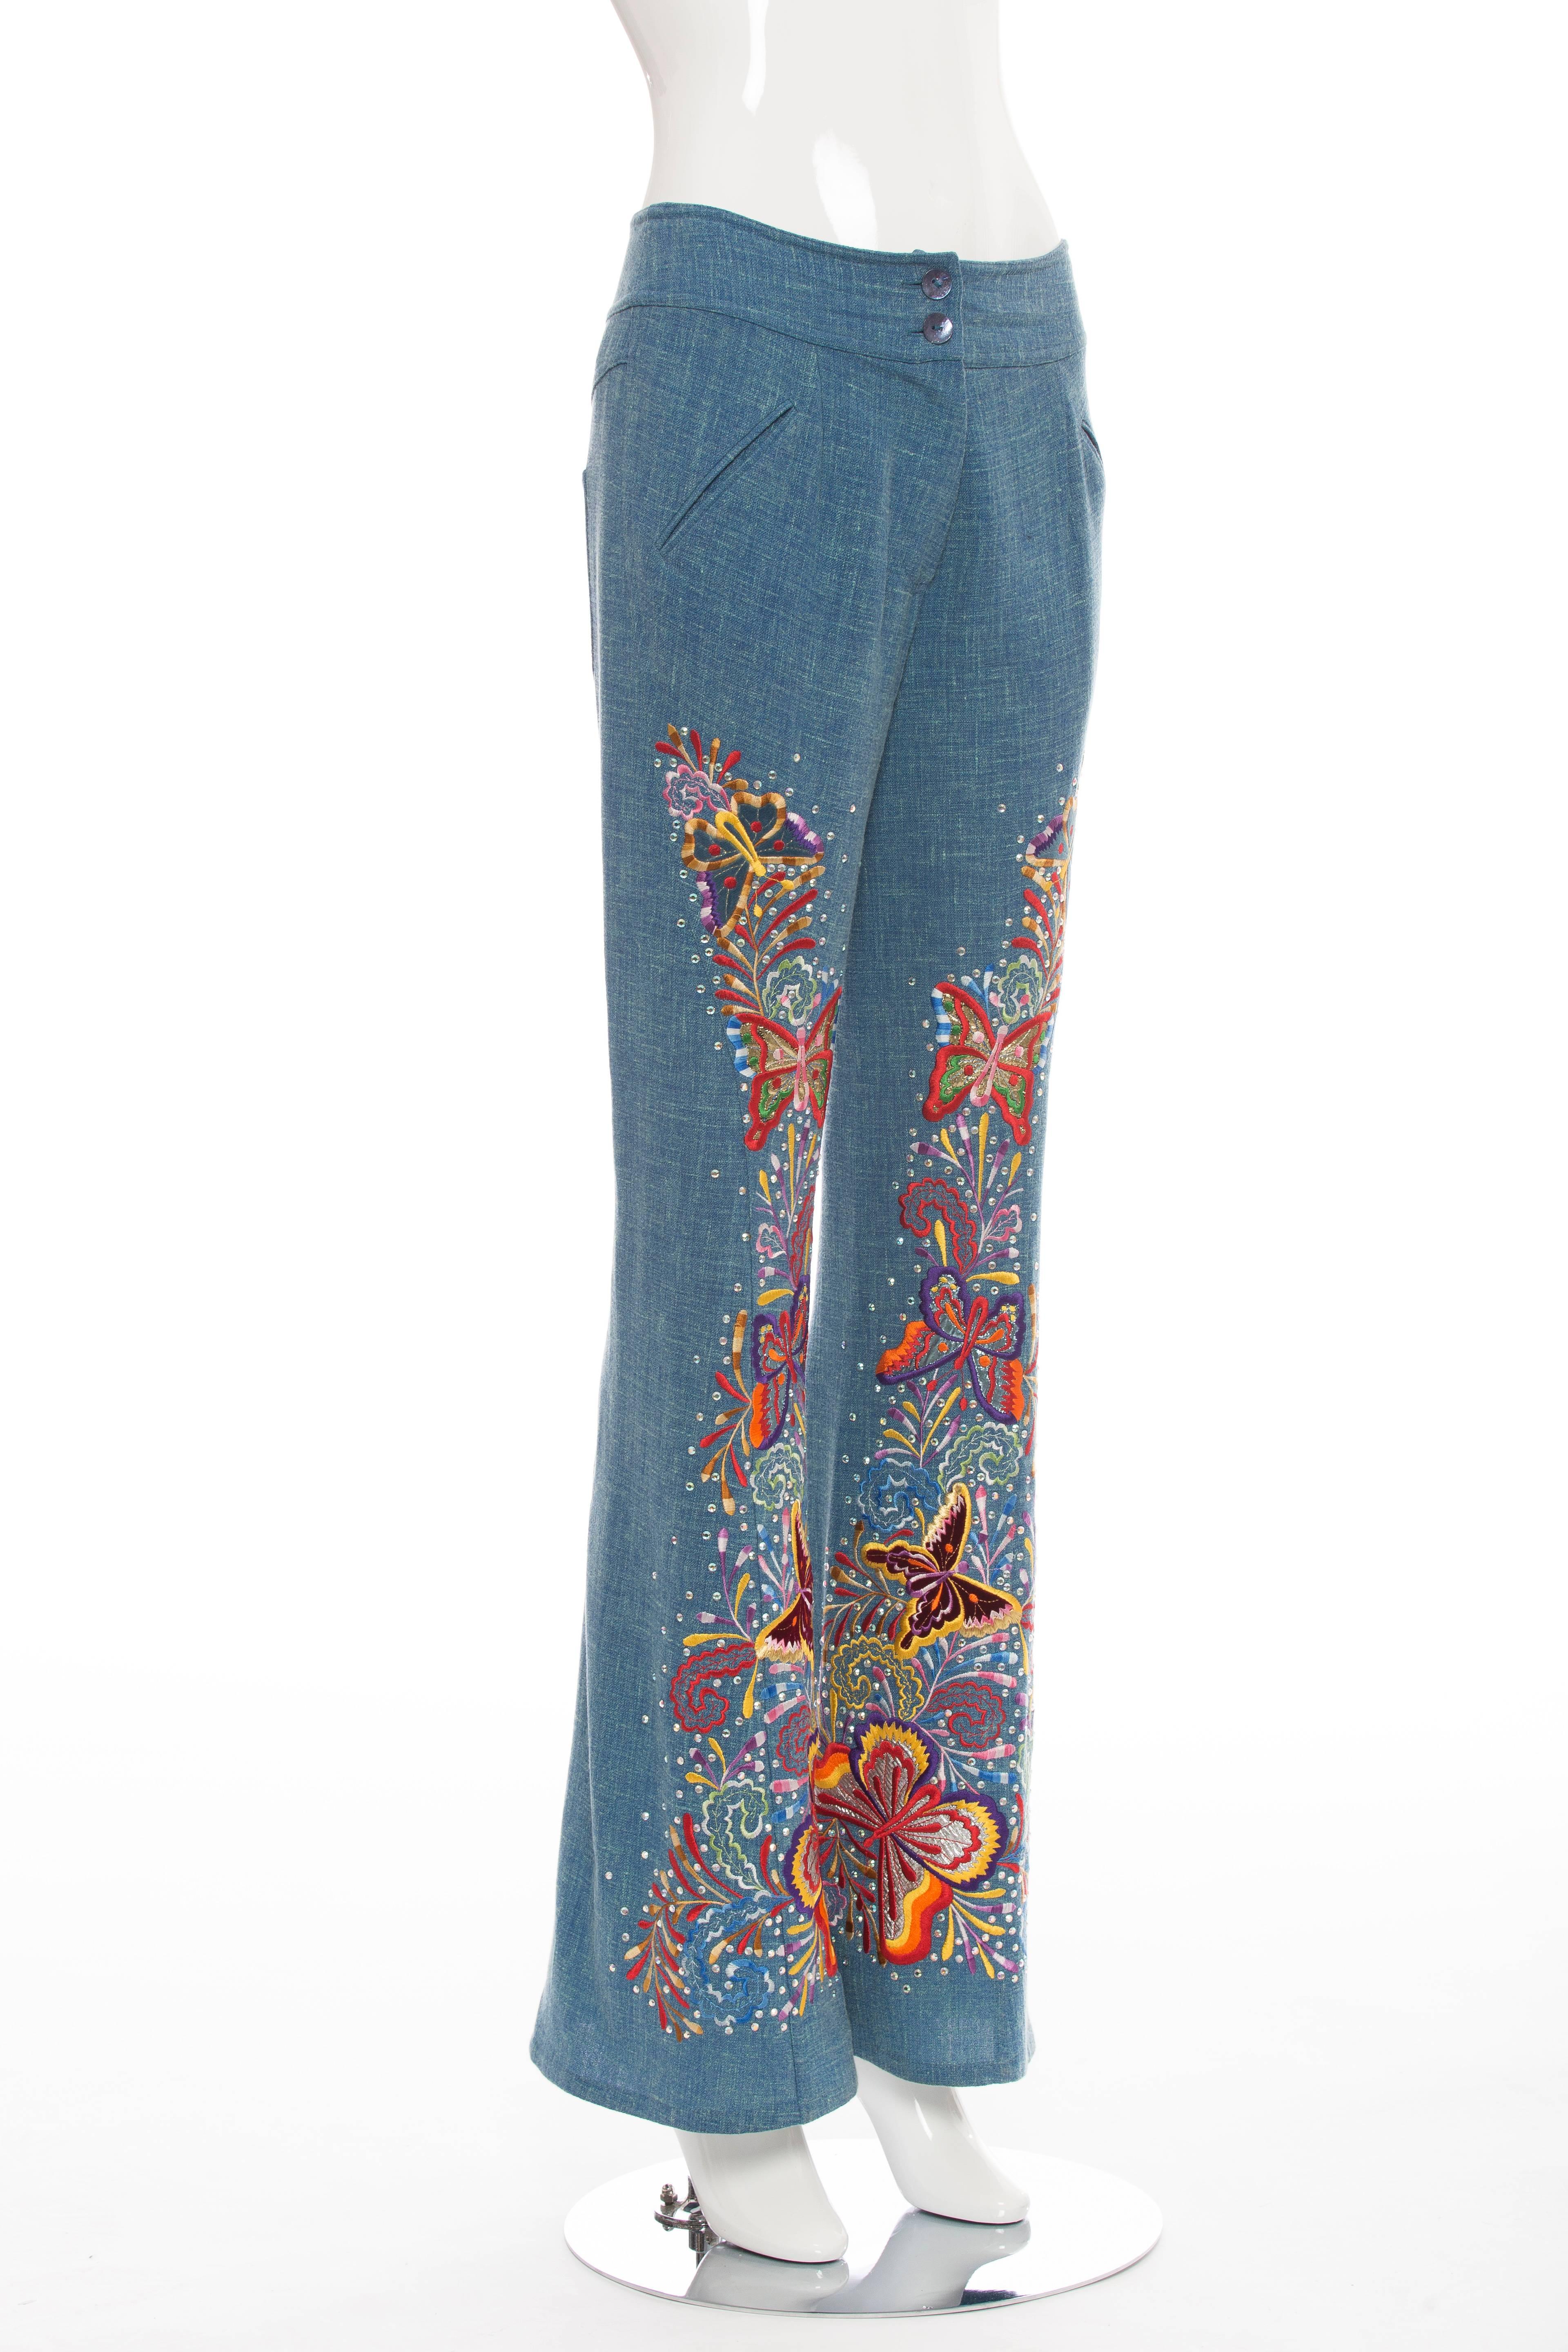 Gray John Galliano For Christian Dior Embroidered Linen Pants, Spring - Summer 2002